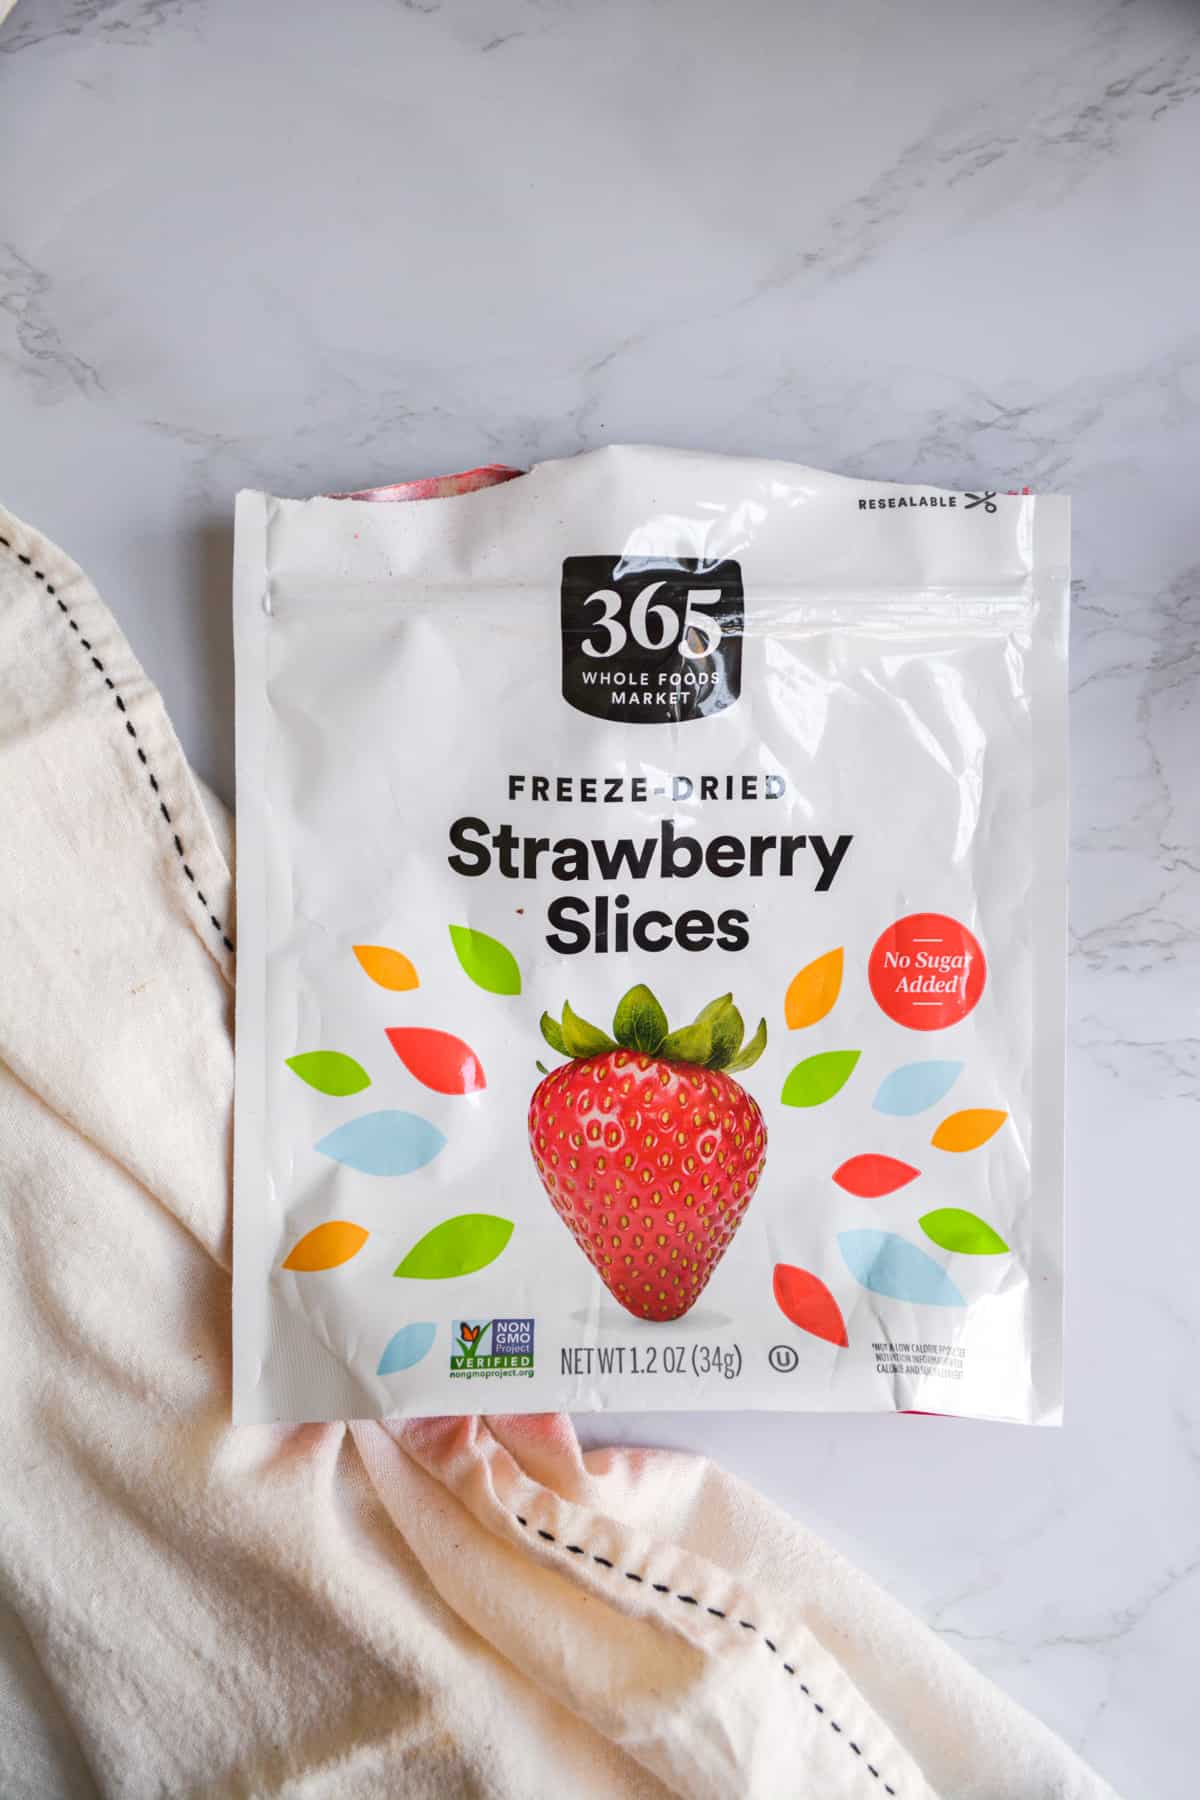 Shot of a package of freeze dried strawberries